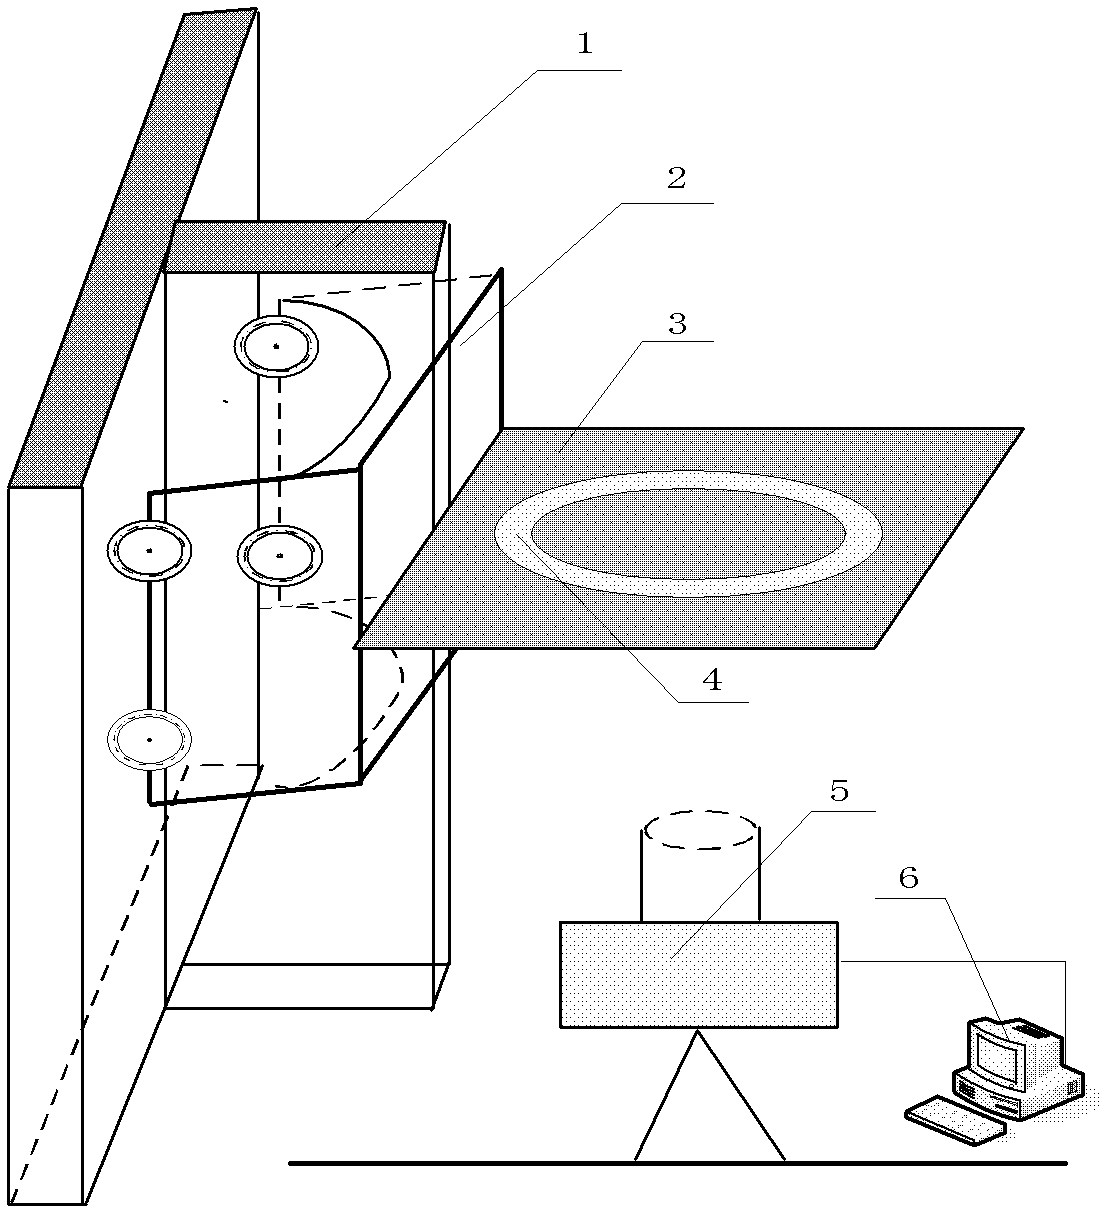 Device and method for detecting elevator guide rail perpendicularity based on visual measurement